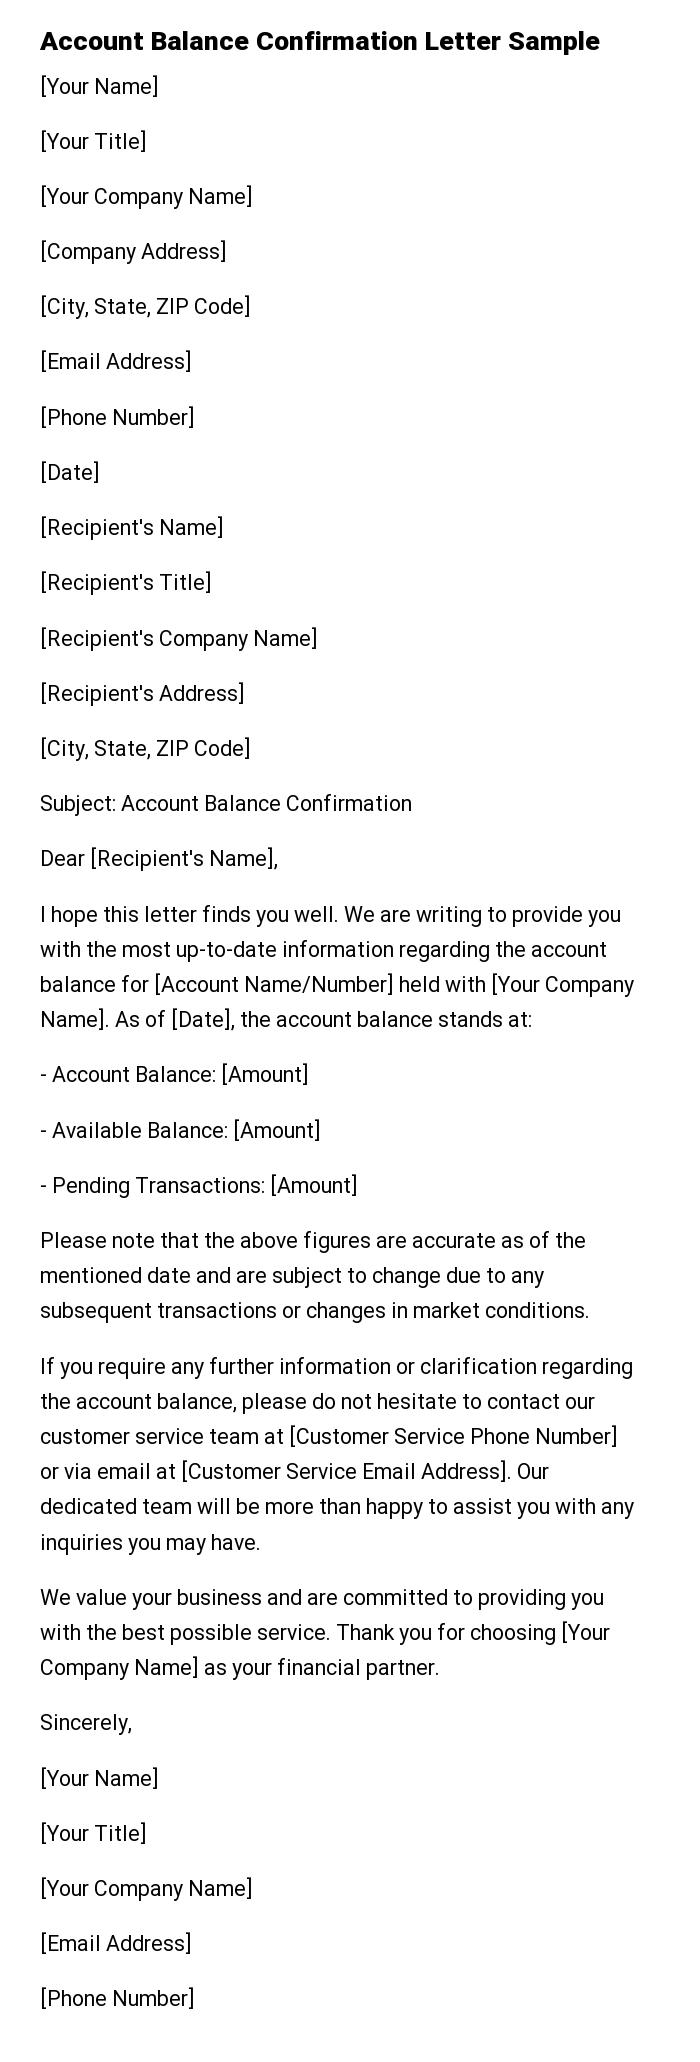 Account Balance Confirmation Letter Sample